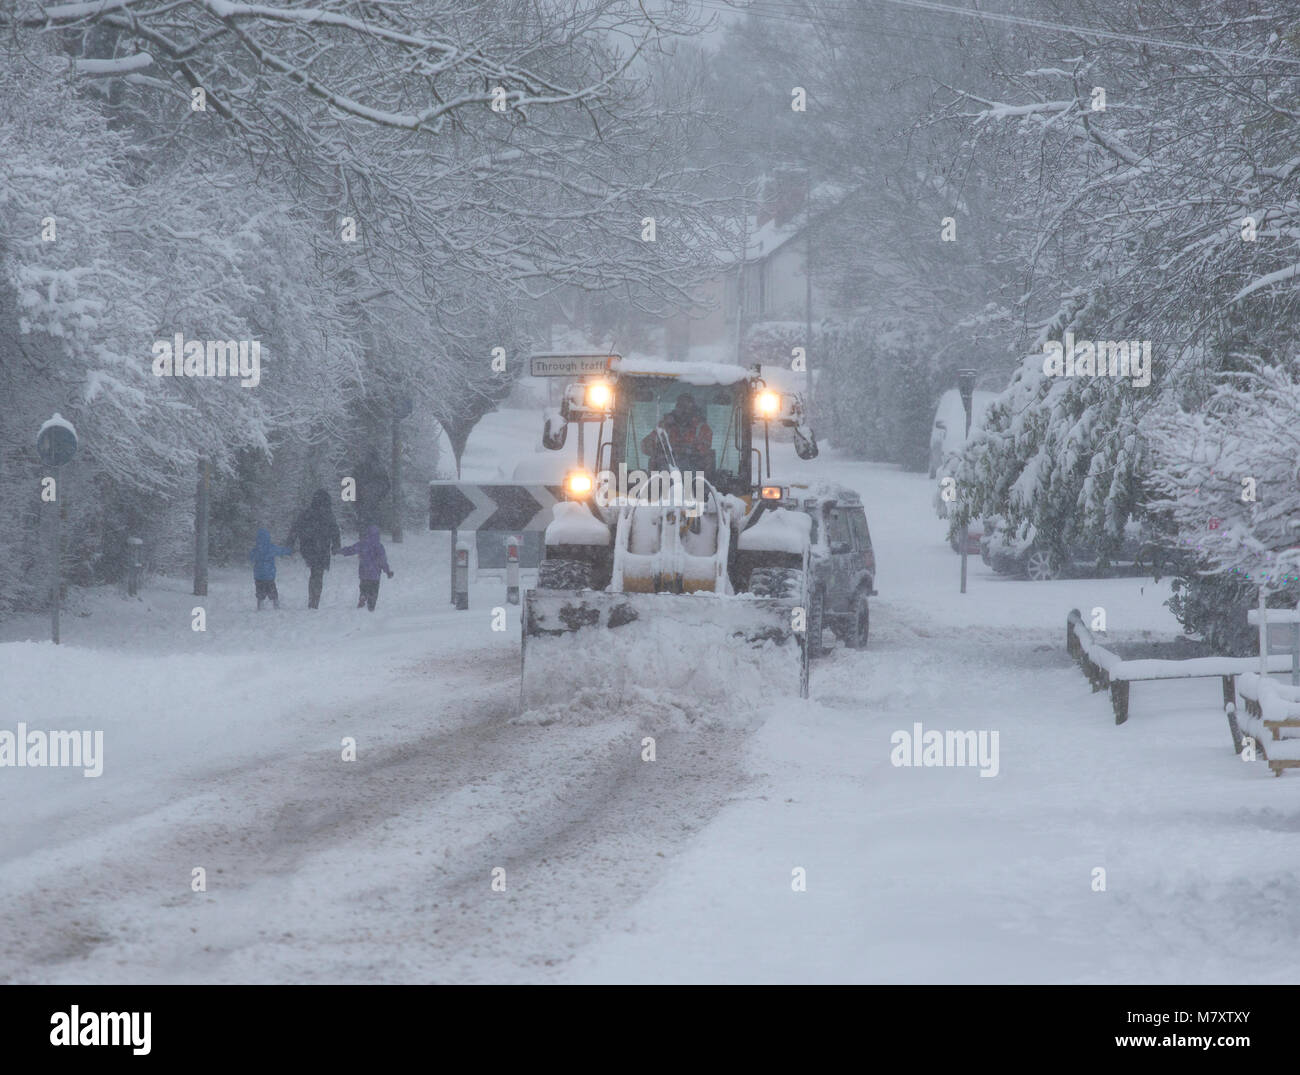 A tractor with a snow plough clearing a road in Redditch, Worcestershire, UK. Stock Photo